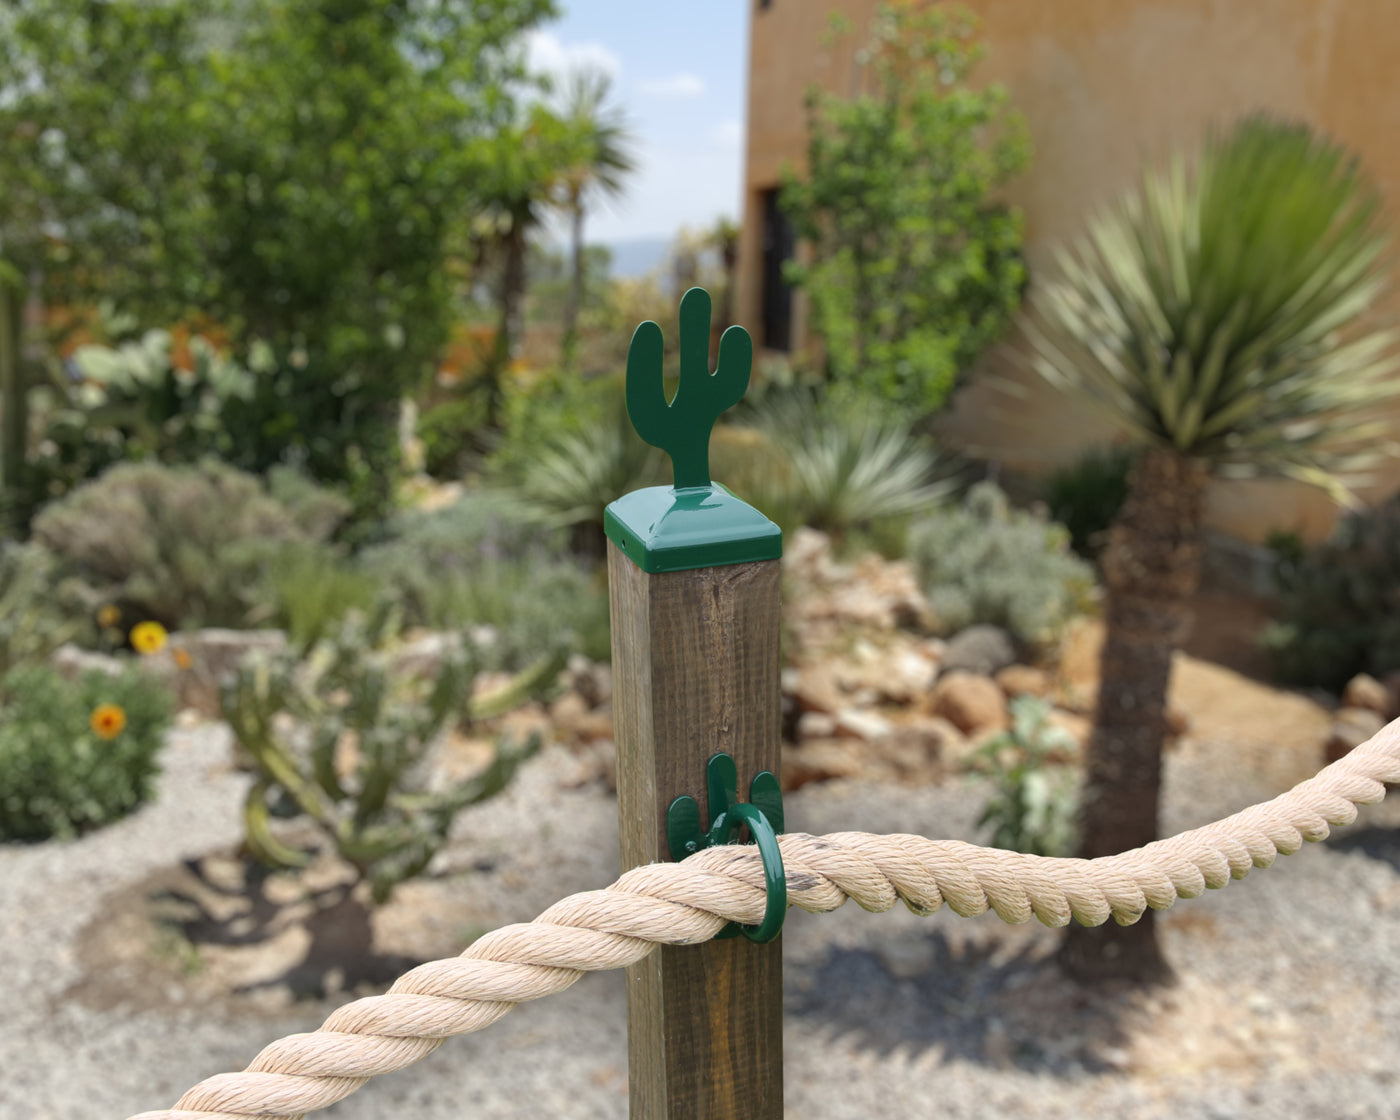 Cactus Nautical Rope Fence Bracket, Light Strand Holder - Madison Iron and Wood - Post Cap - metal outdoor decor - Steel deocrations - american made products - veteran owned business products - fencing decorations - fencing supplies - custom wall decorations - personalized wall signs - steel - decorative post caps - steel post caps - metal post caps - brackets - structural brackets - home improvement - easter - easter decorations - easter gift - easter yard decor